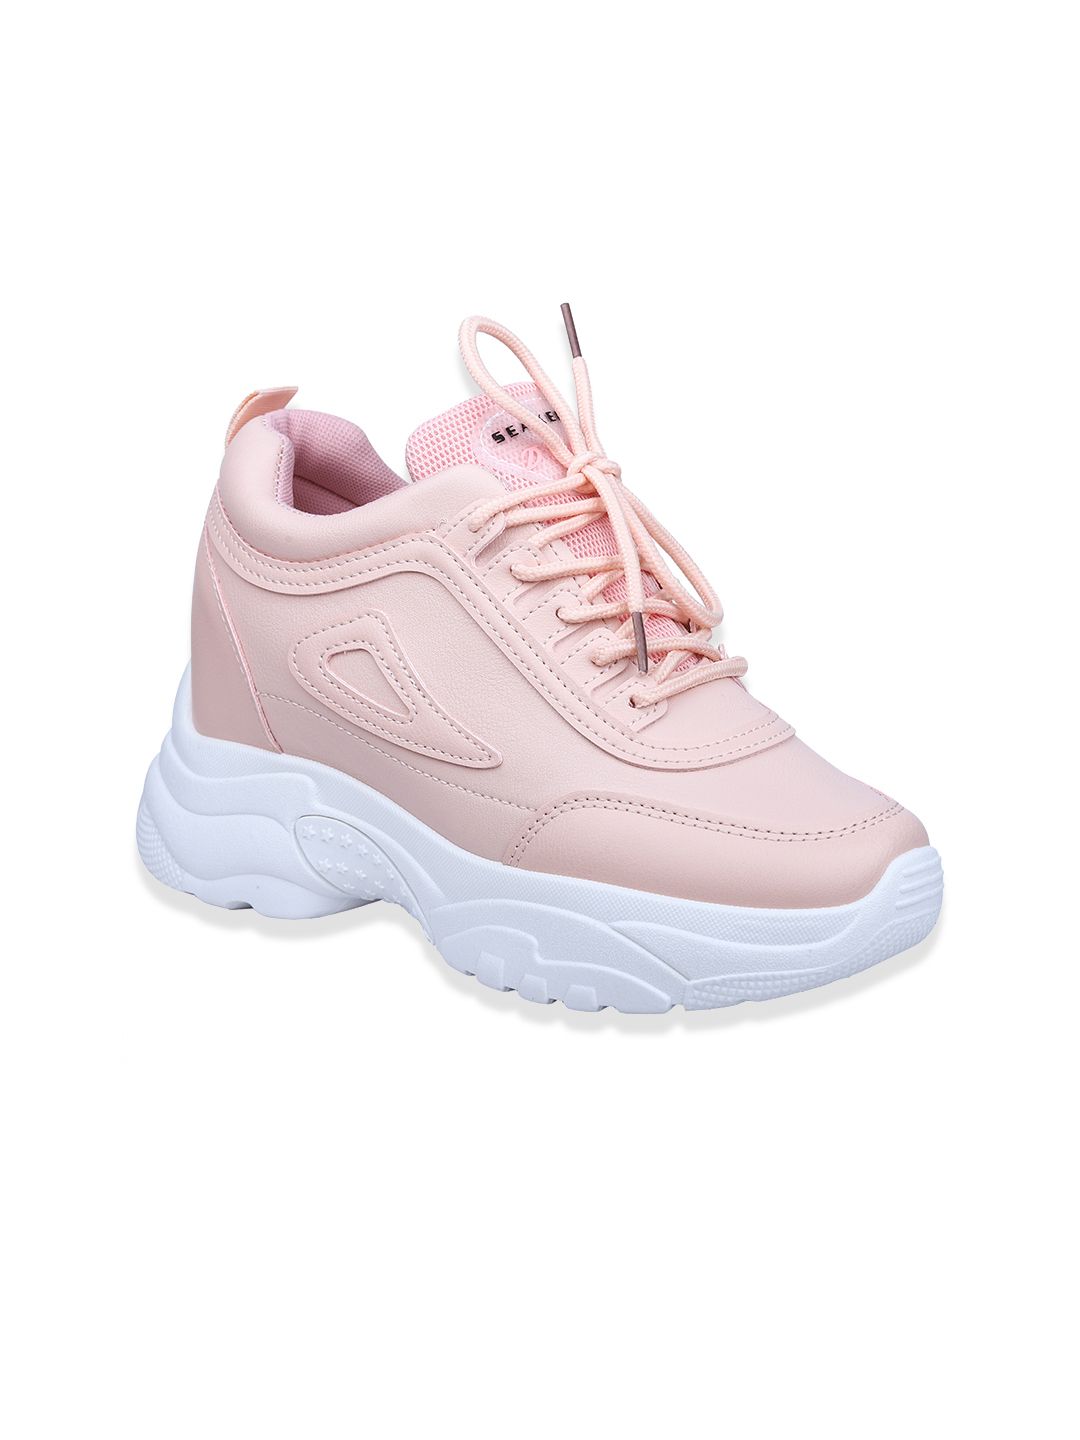 CASSIEY Women Pink High-Top Walking Shoes Price in India